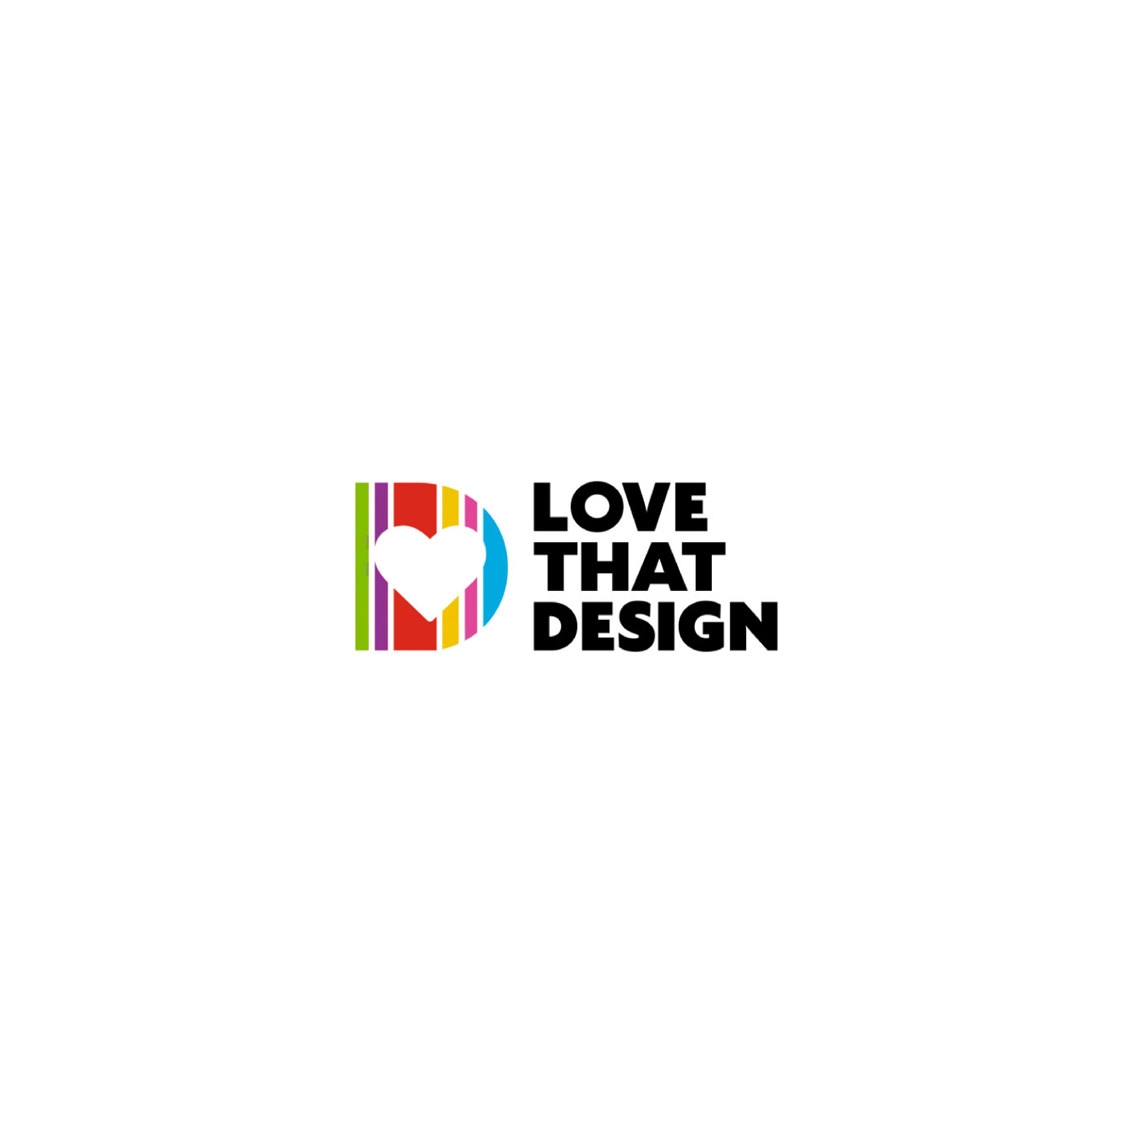 Love That Design, 2019 MMAPROJECTS S.R.L.